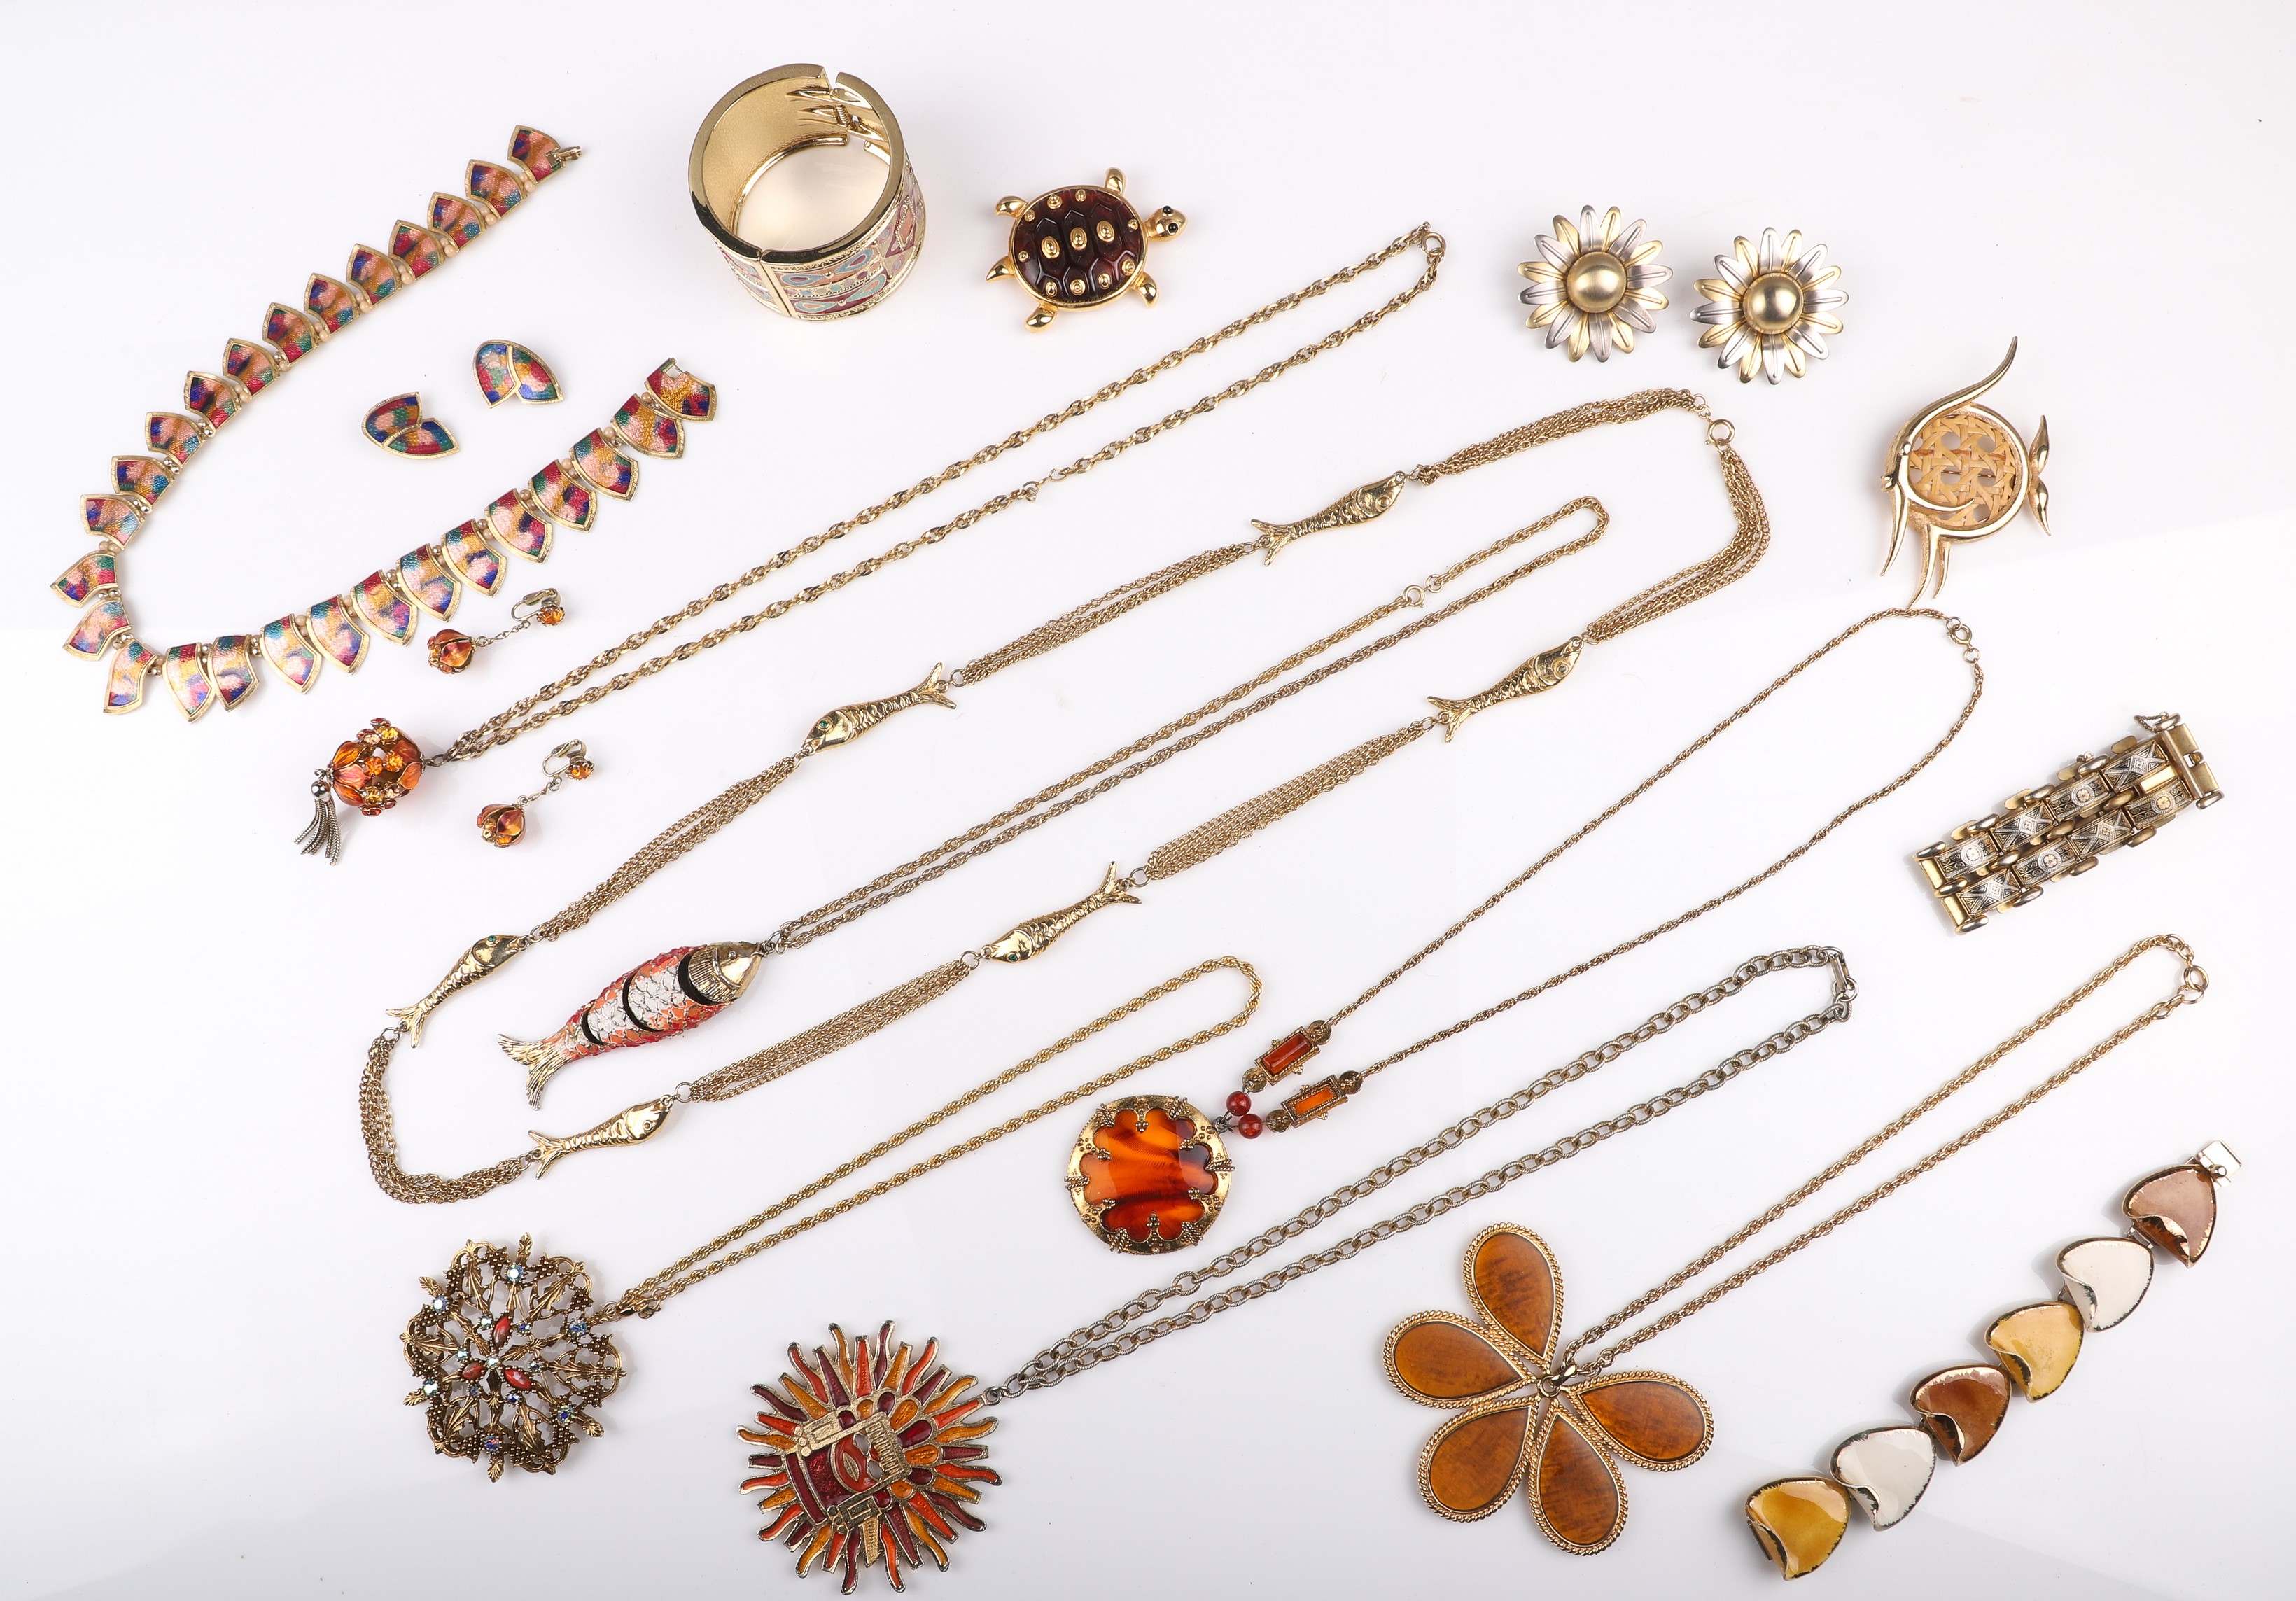 60's and style costume jewelry